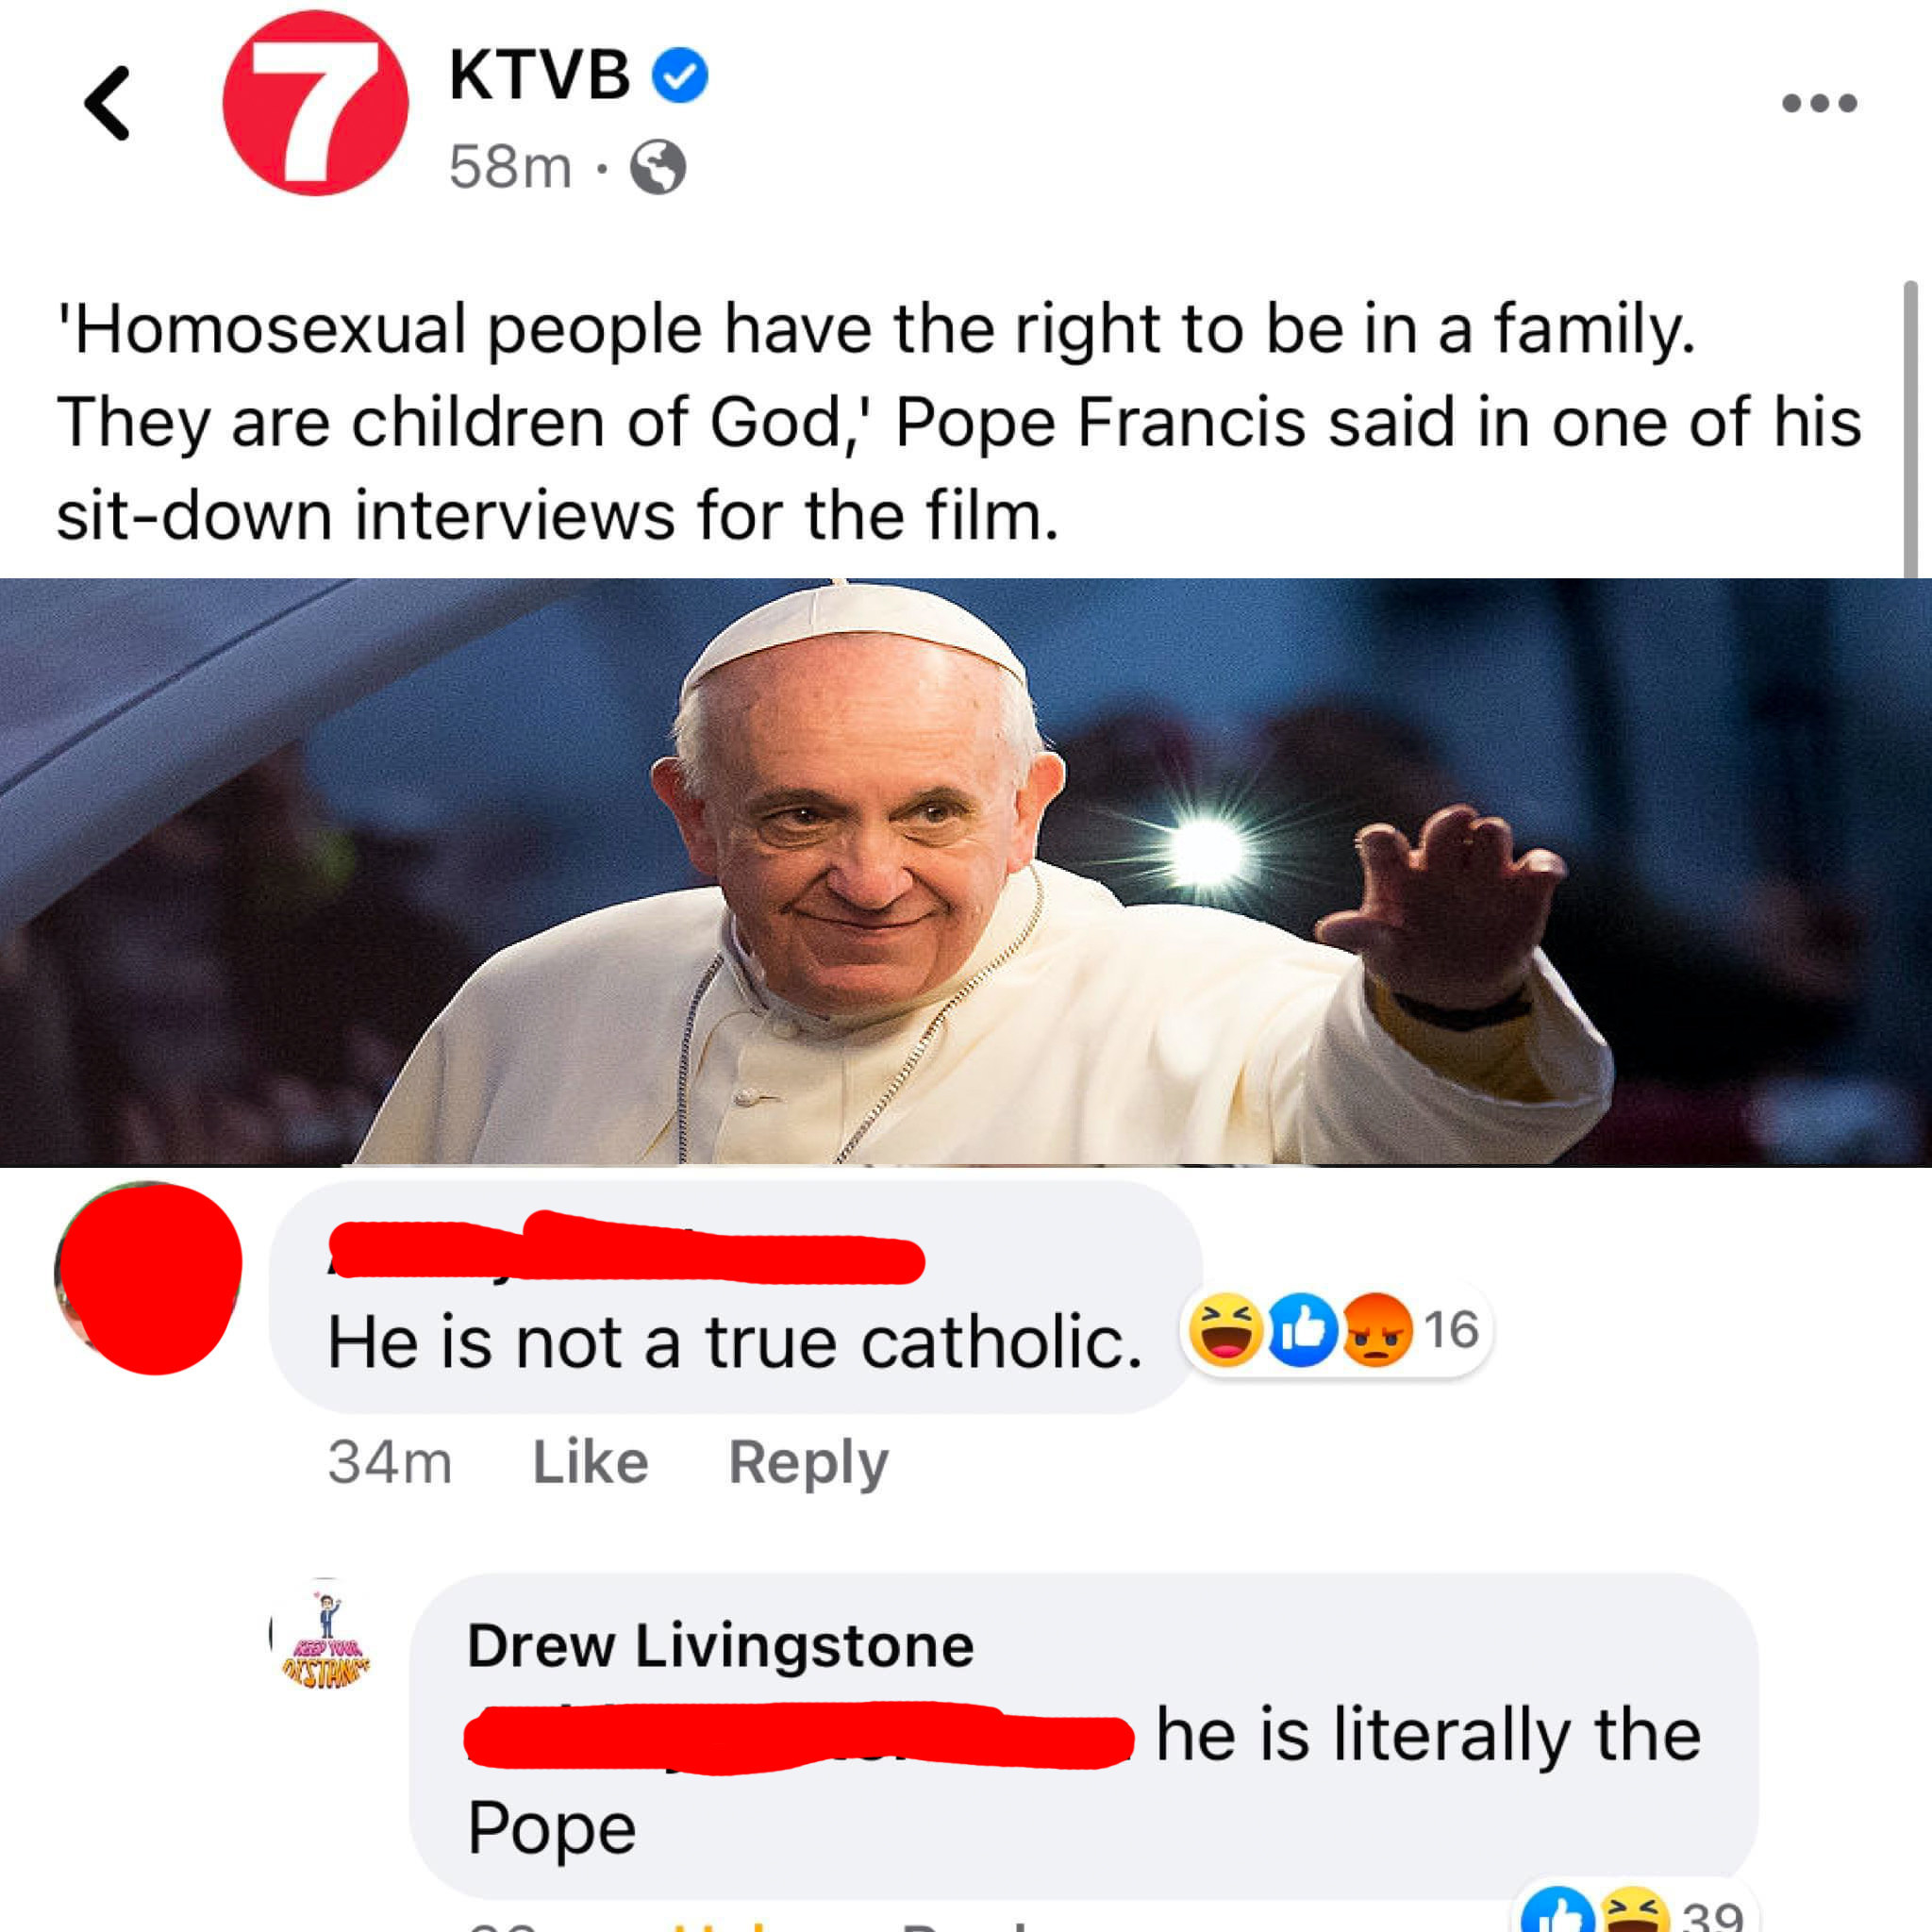 person acusing the pope of not being catholic